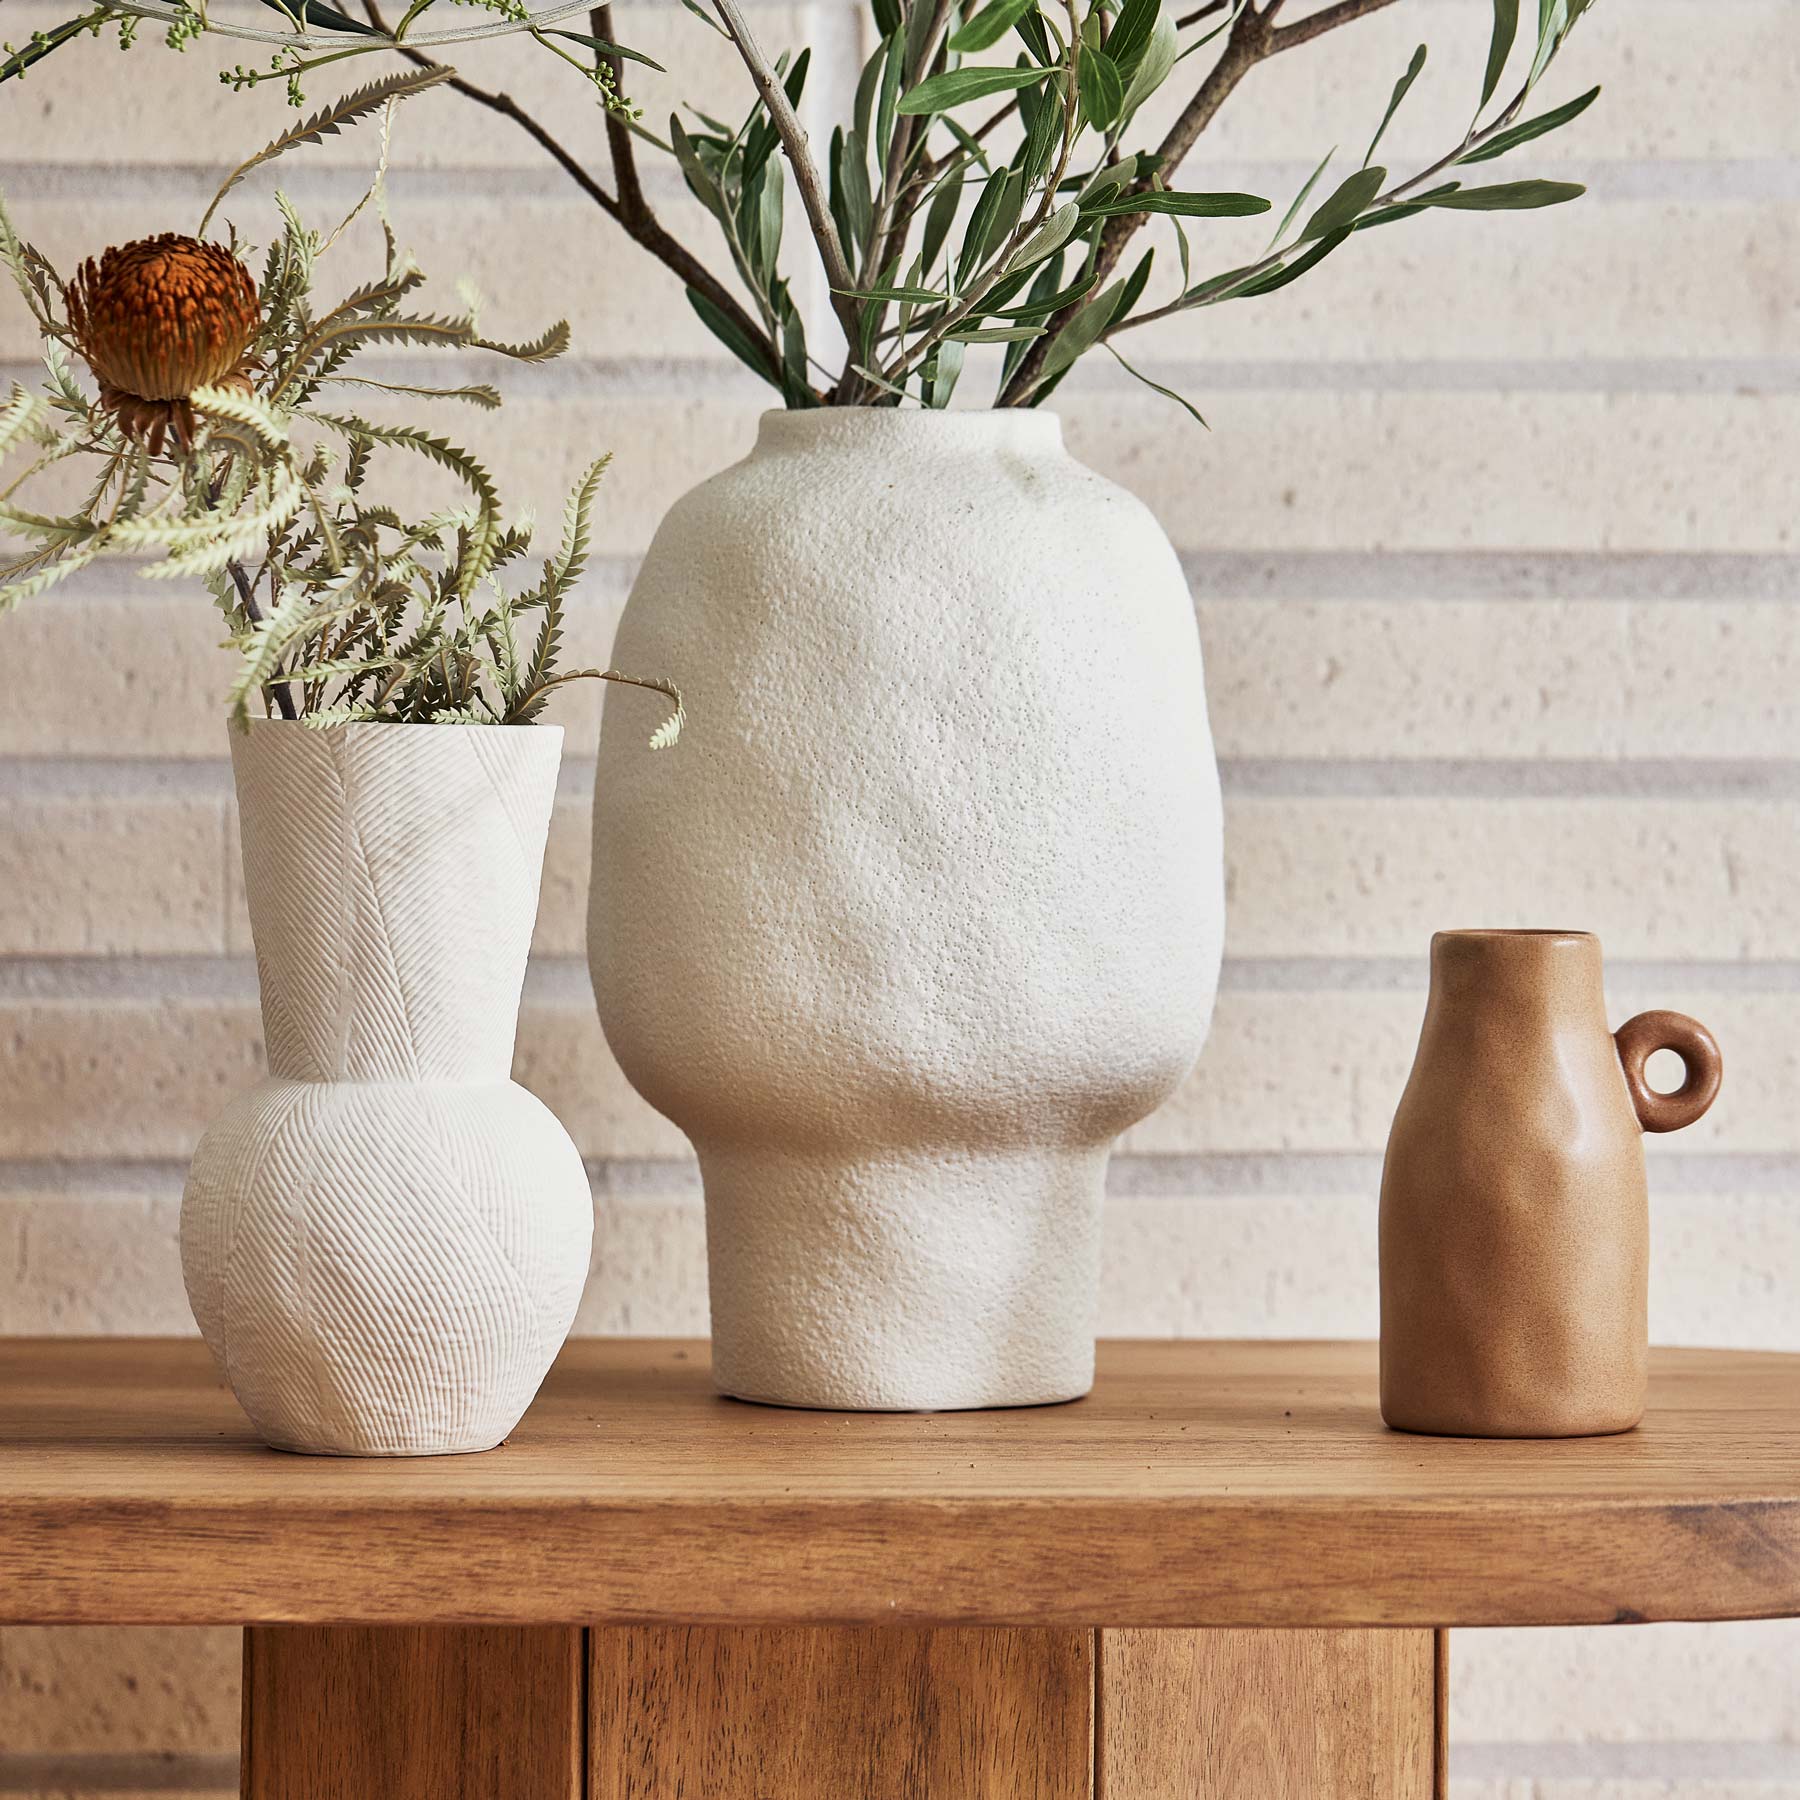 Clyde Clay Mini Vase-Pots, Planters & Vases-Madras Link-The Bay Room